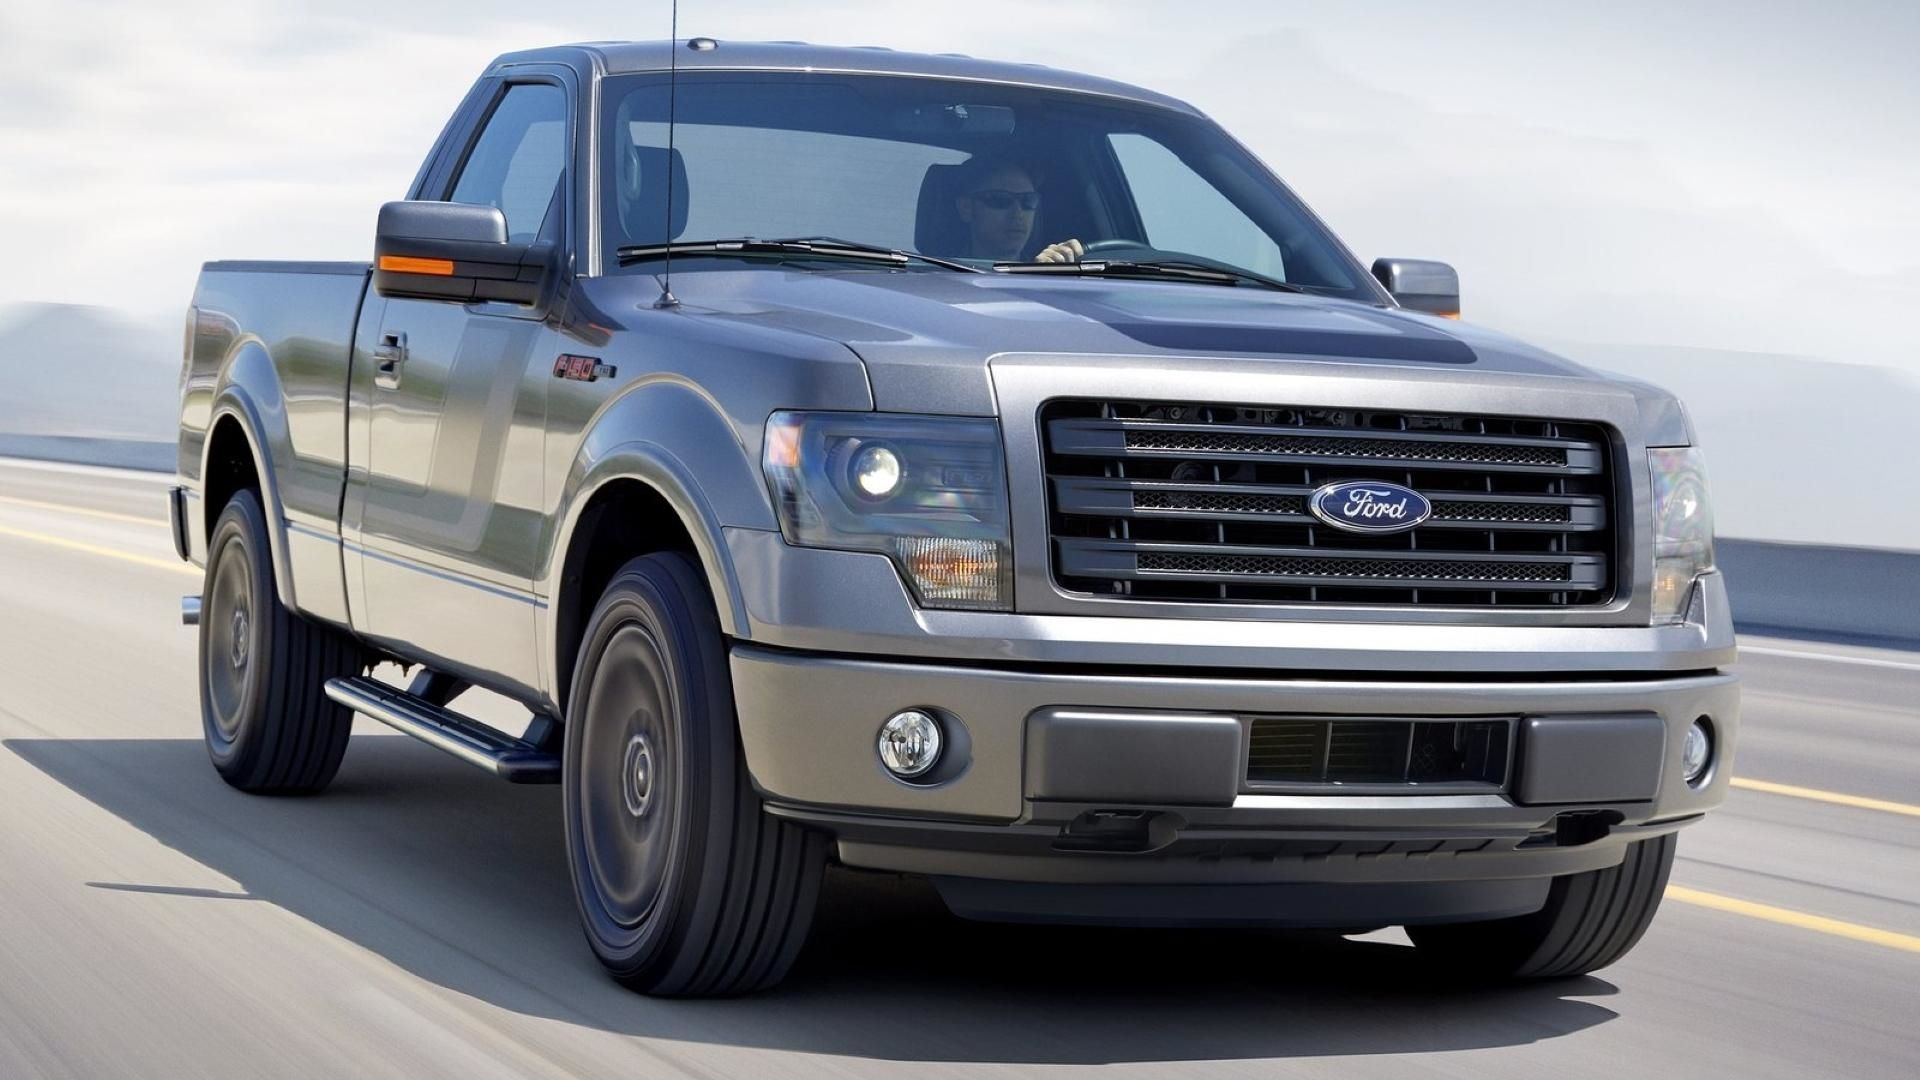 2014 Ford F-150 Tremor Trim - Front Angle